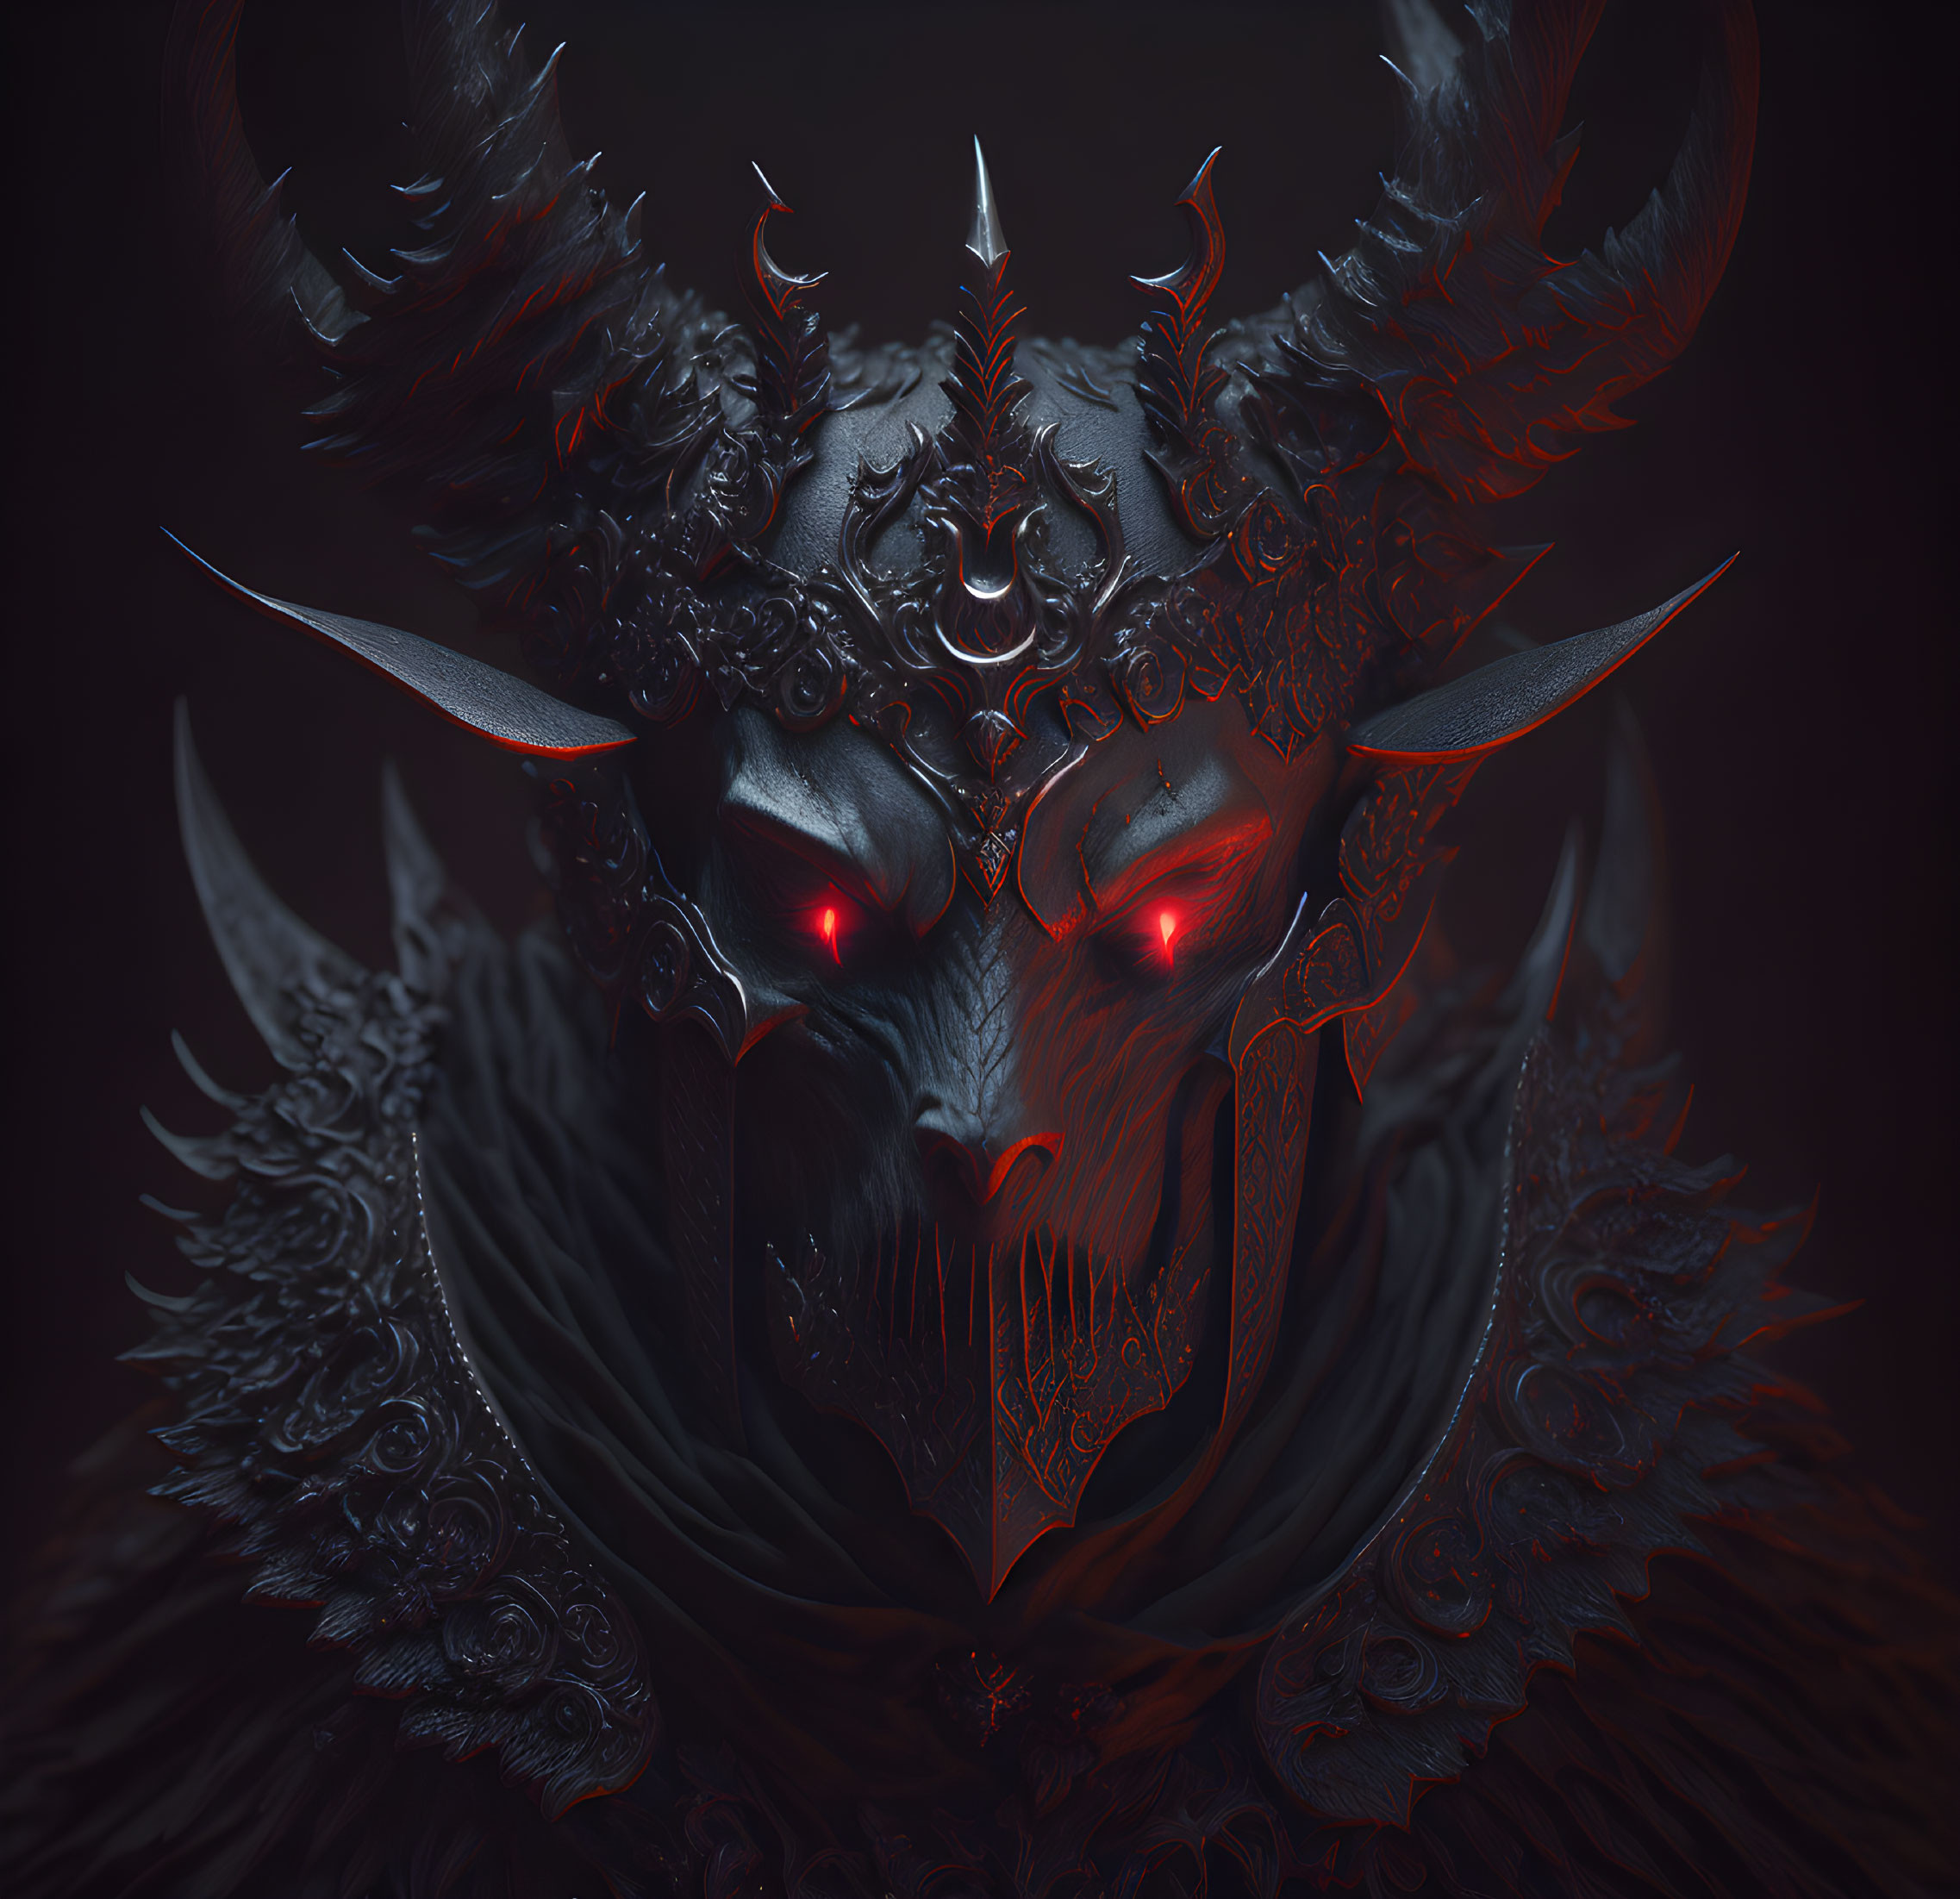 Fantasy creature with glowing red eyes and dark horns in intricate armor